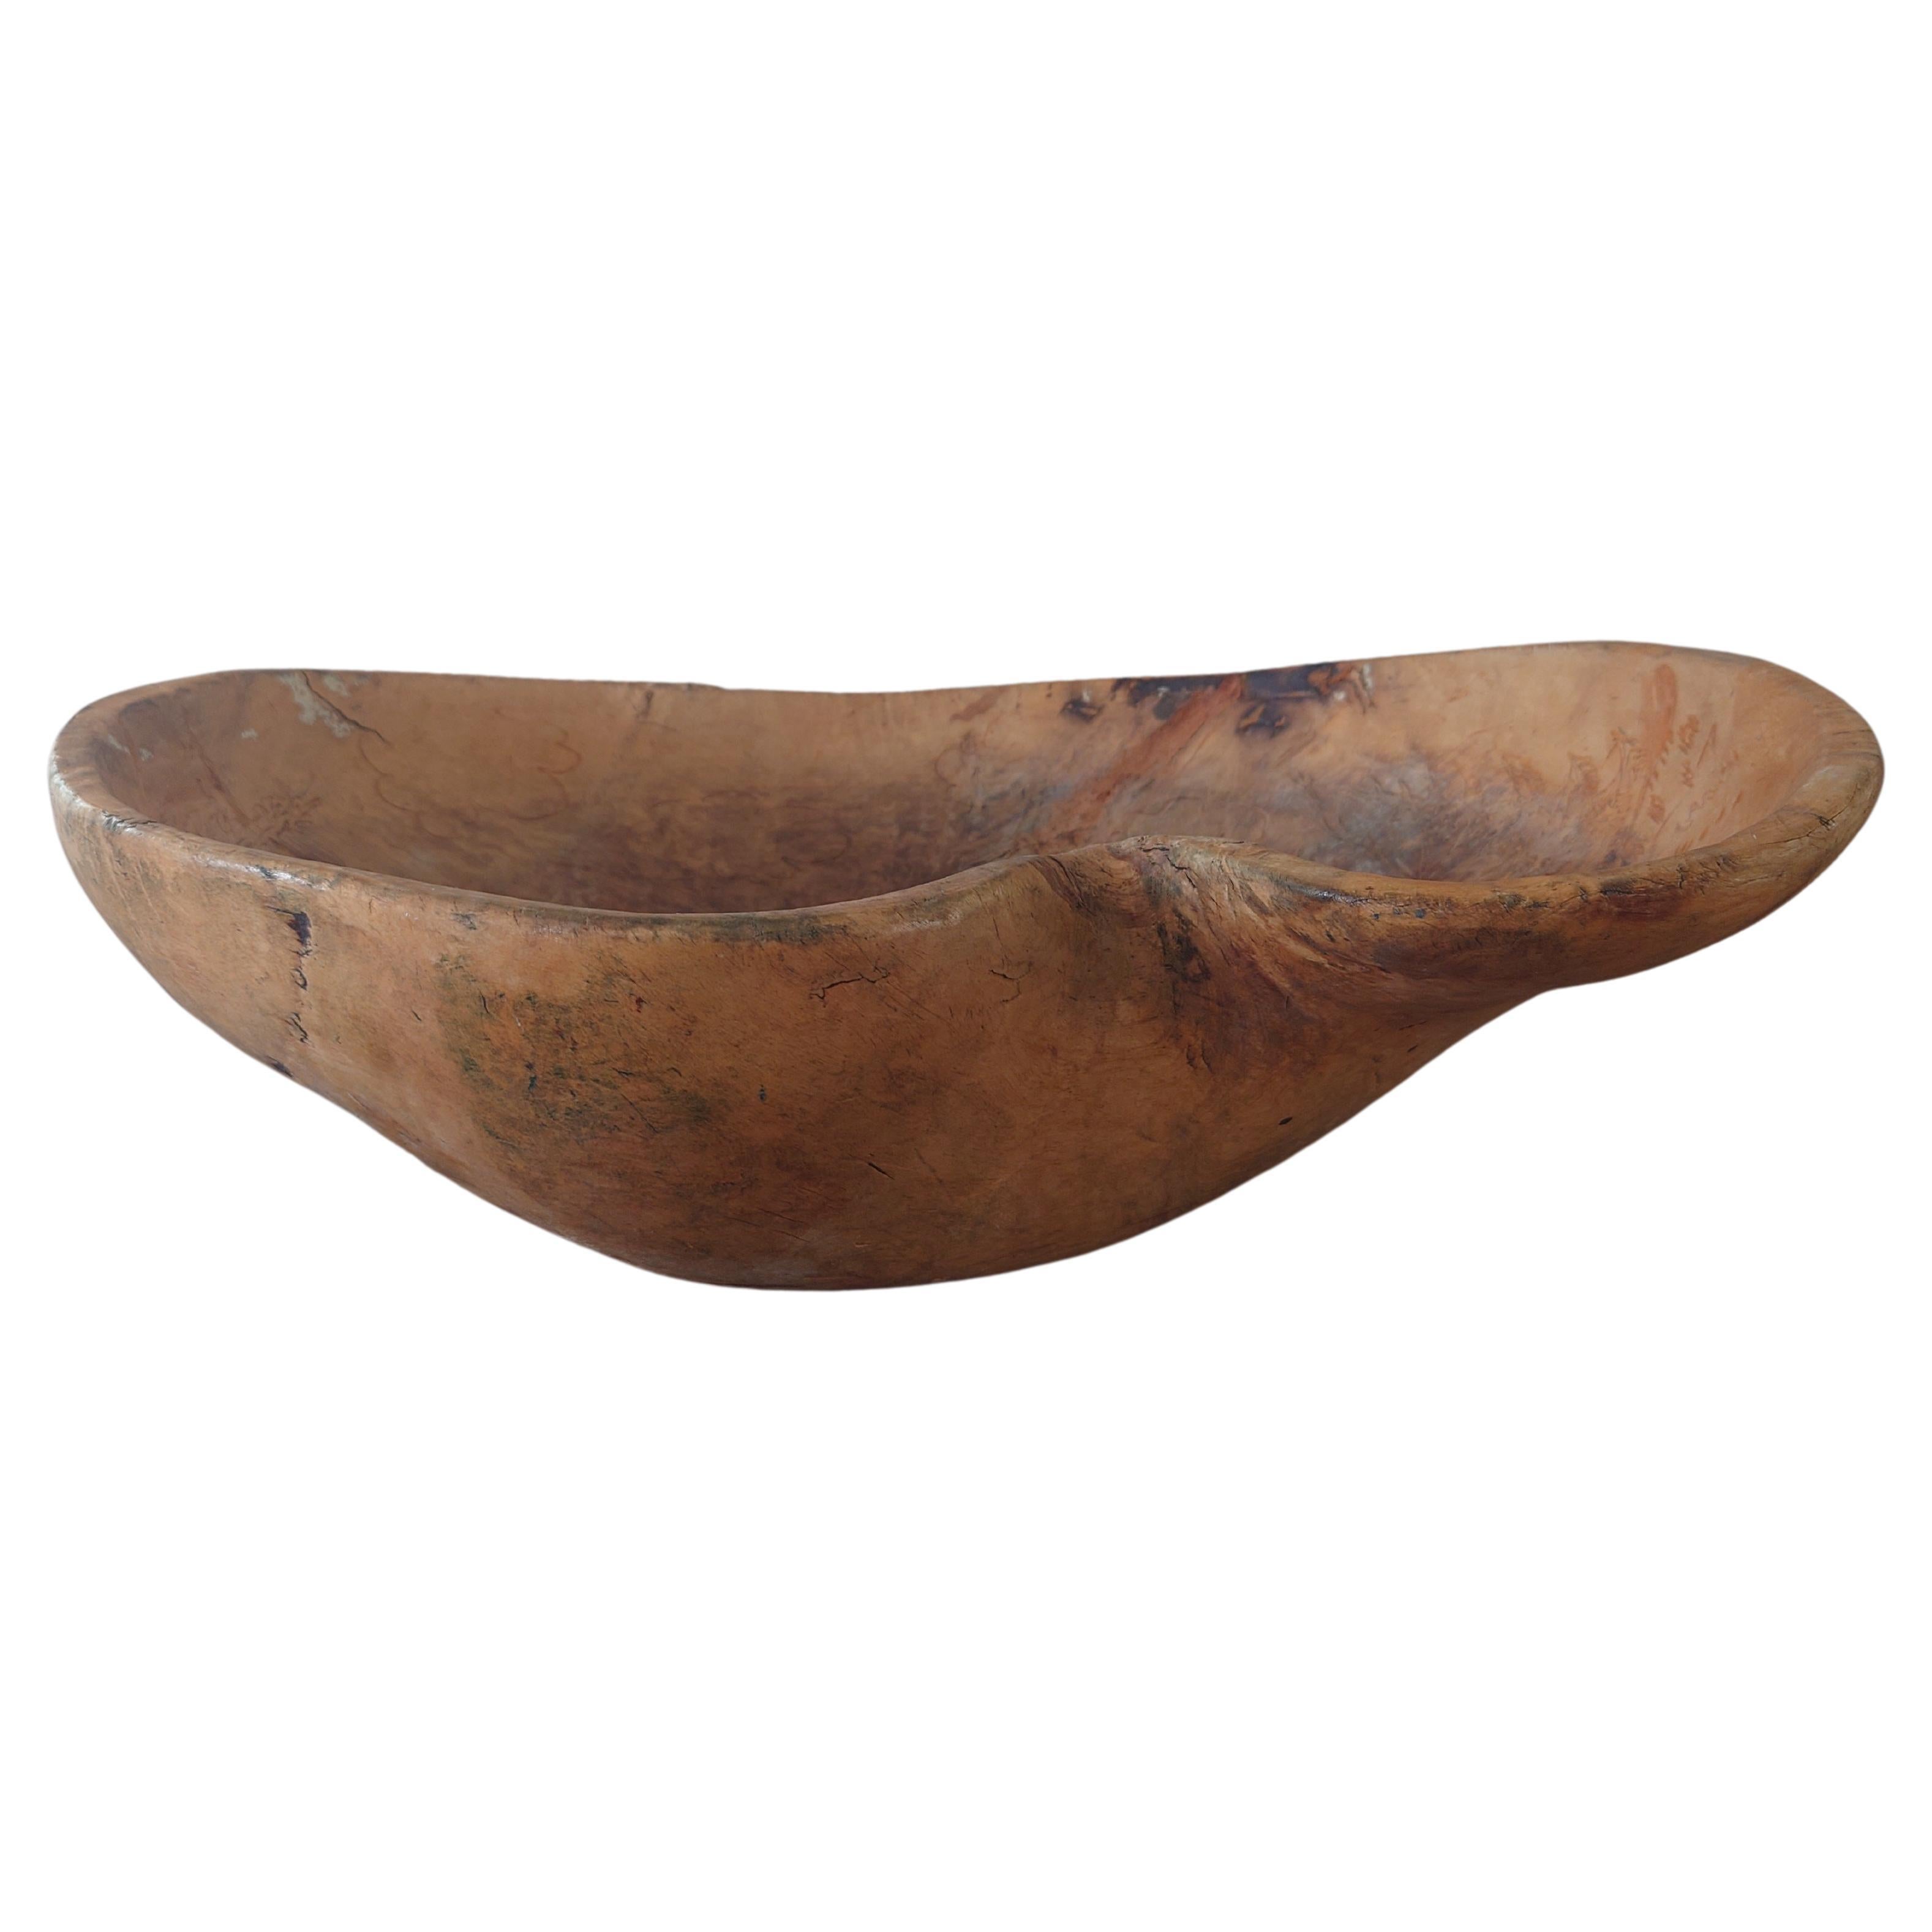 19th century Swedish wooden bowl  from Northern Sweden.
A genuine 19th century Swedish Folk Art Wooden bowl with lovely patina.
The bowl has a fantastically fine wood carving in the shape of a moose on a mountain inside the bowl. It is signed inside